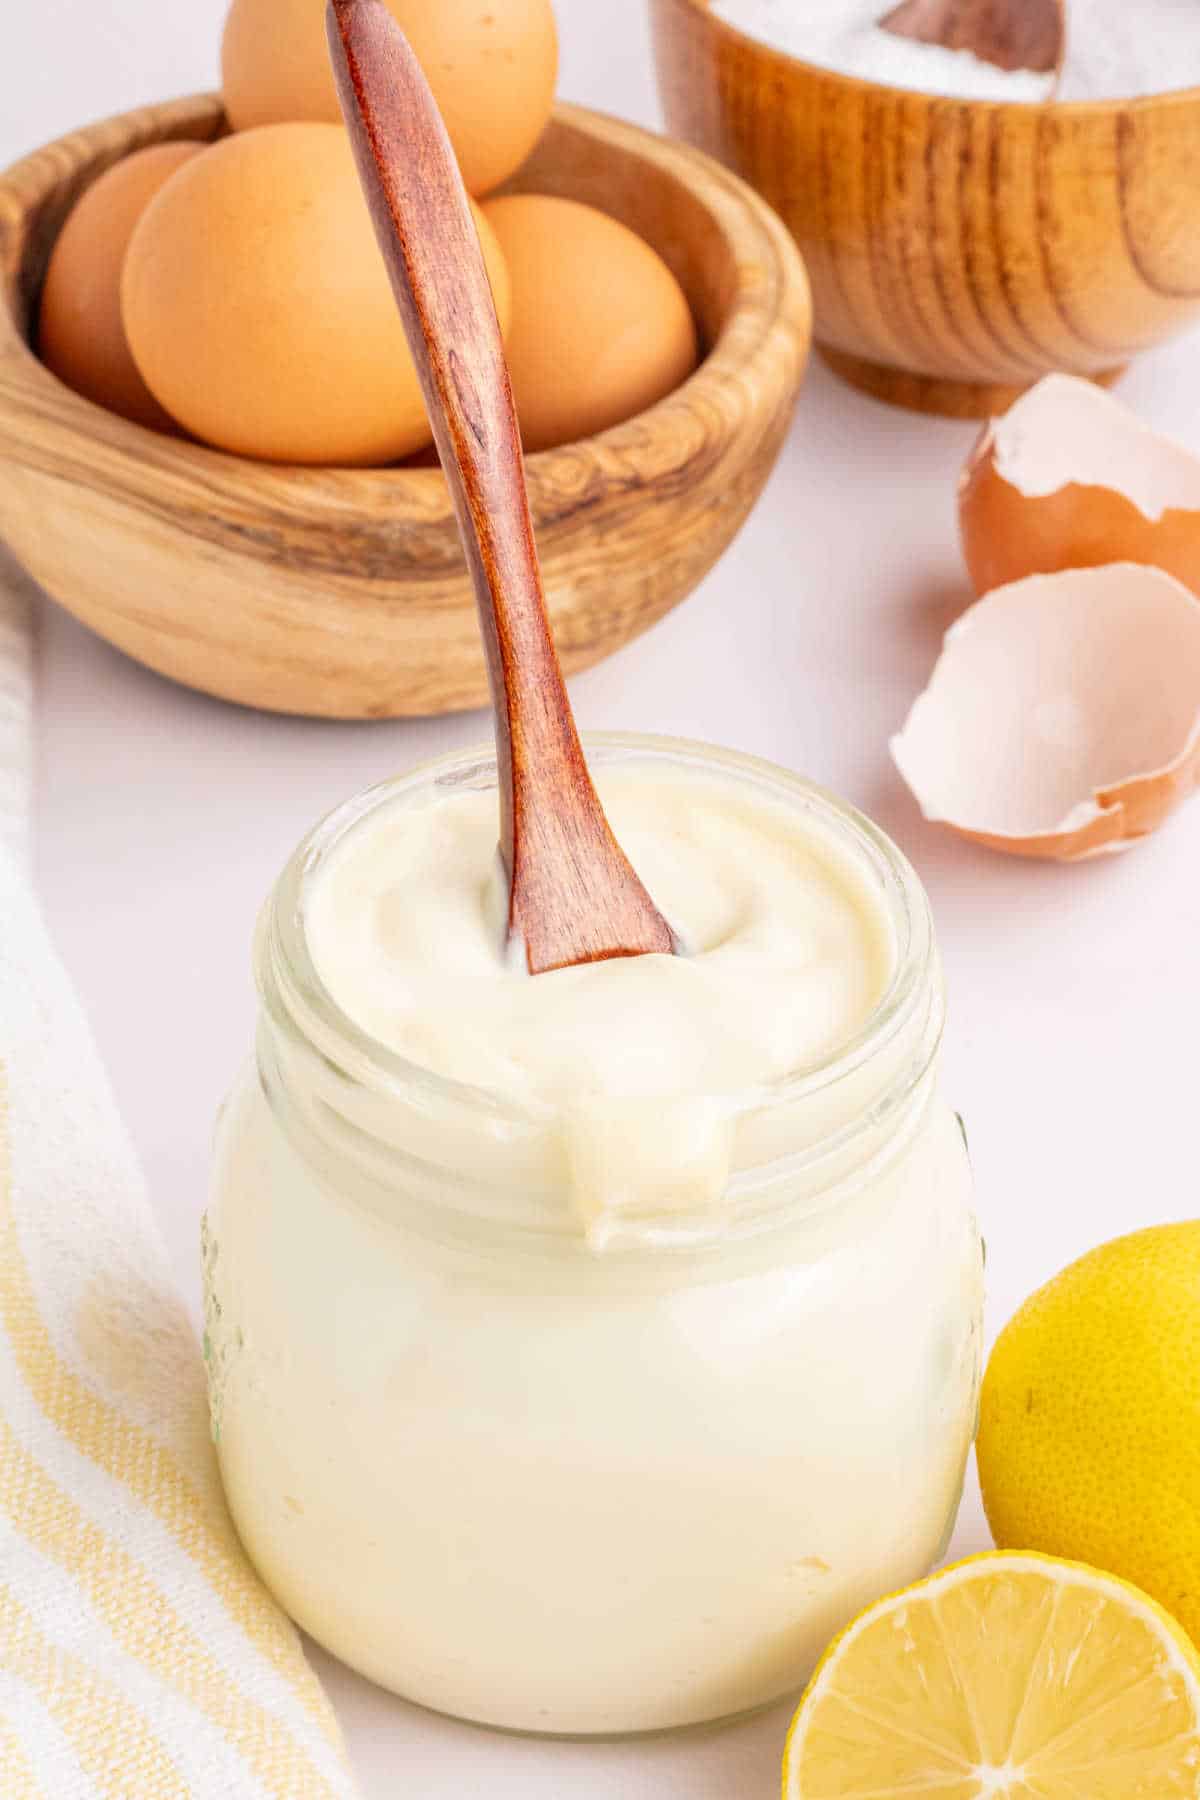 A jar of mayonnaise with a wooden spoon in it.